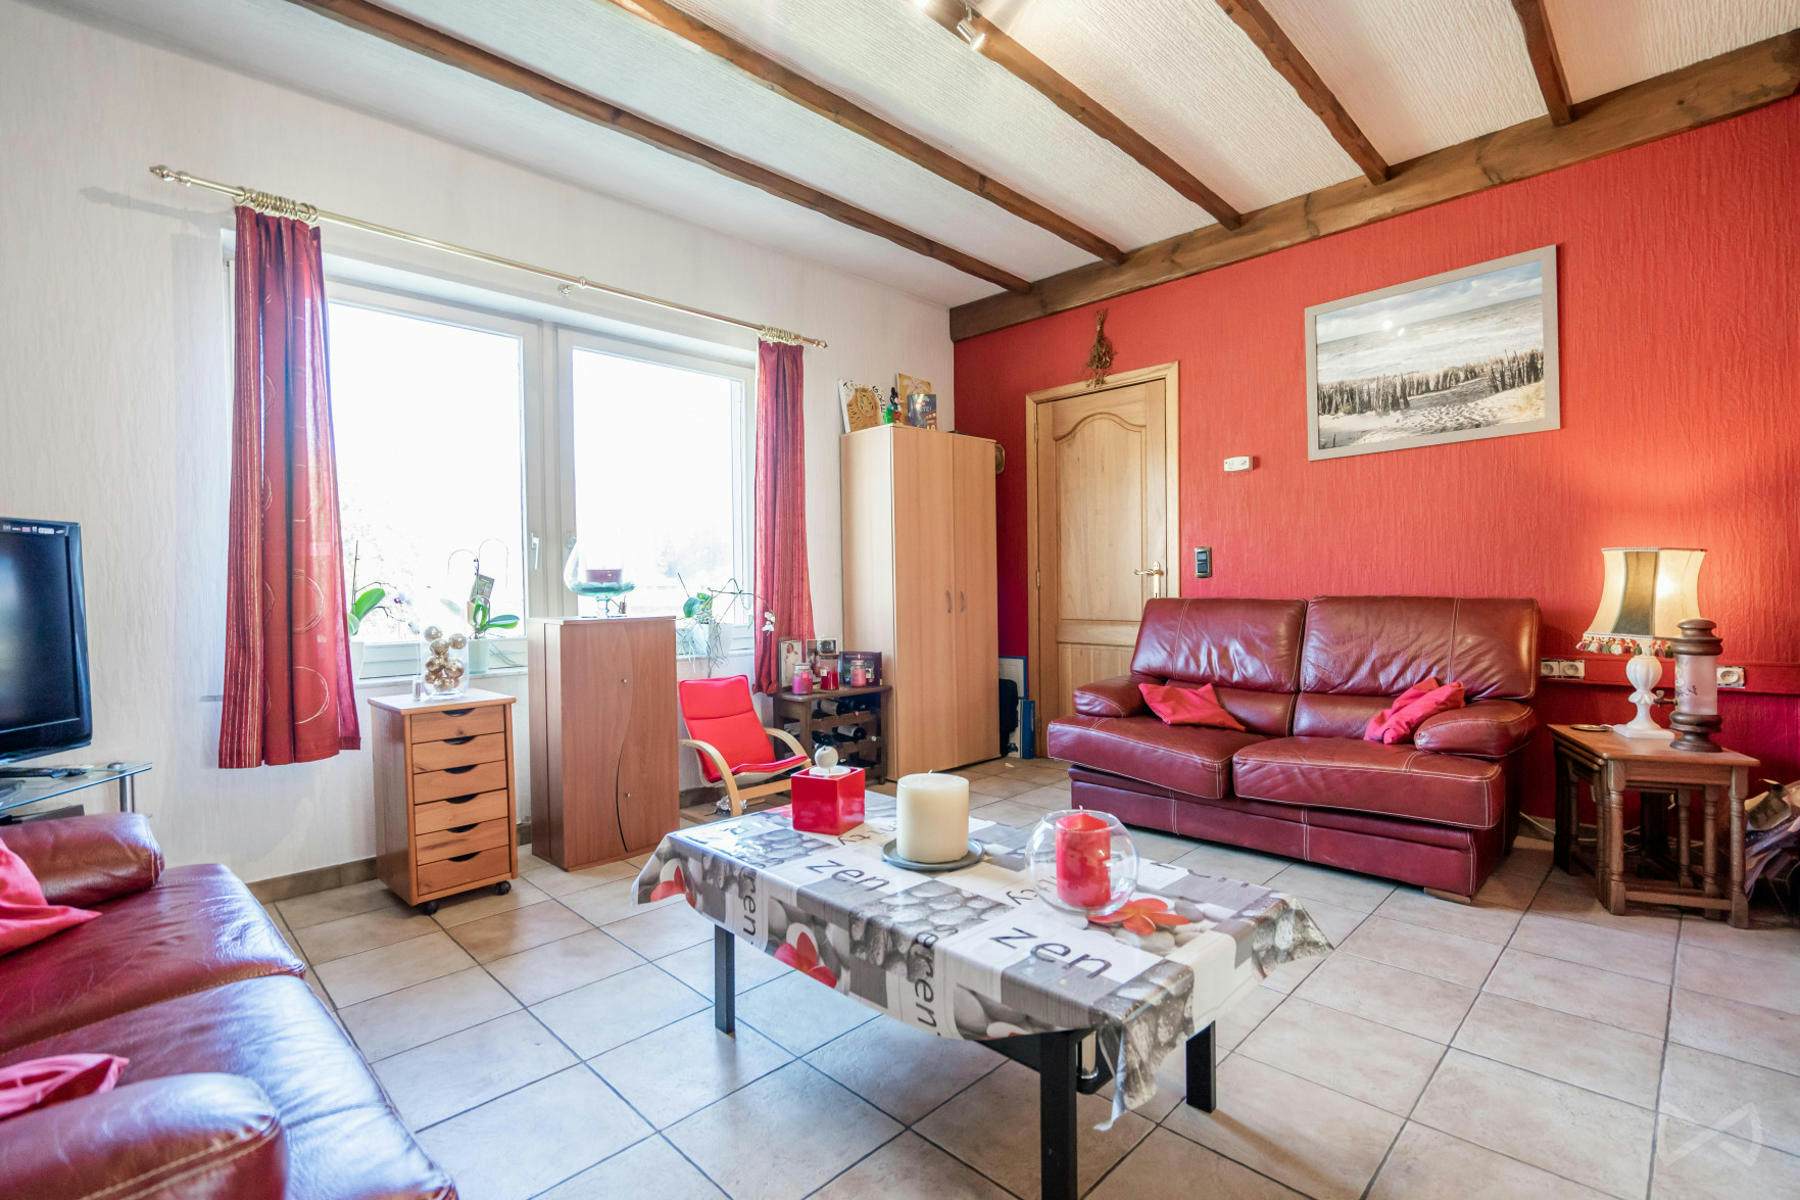 Picture 4 of 4 for Villa with two bedrooms in Court-saint-Étienne